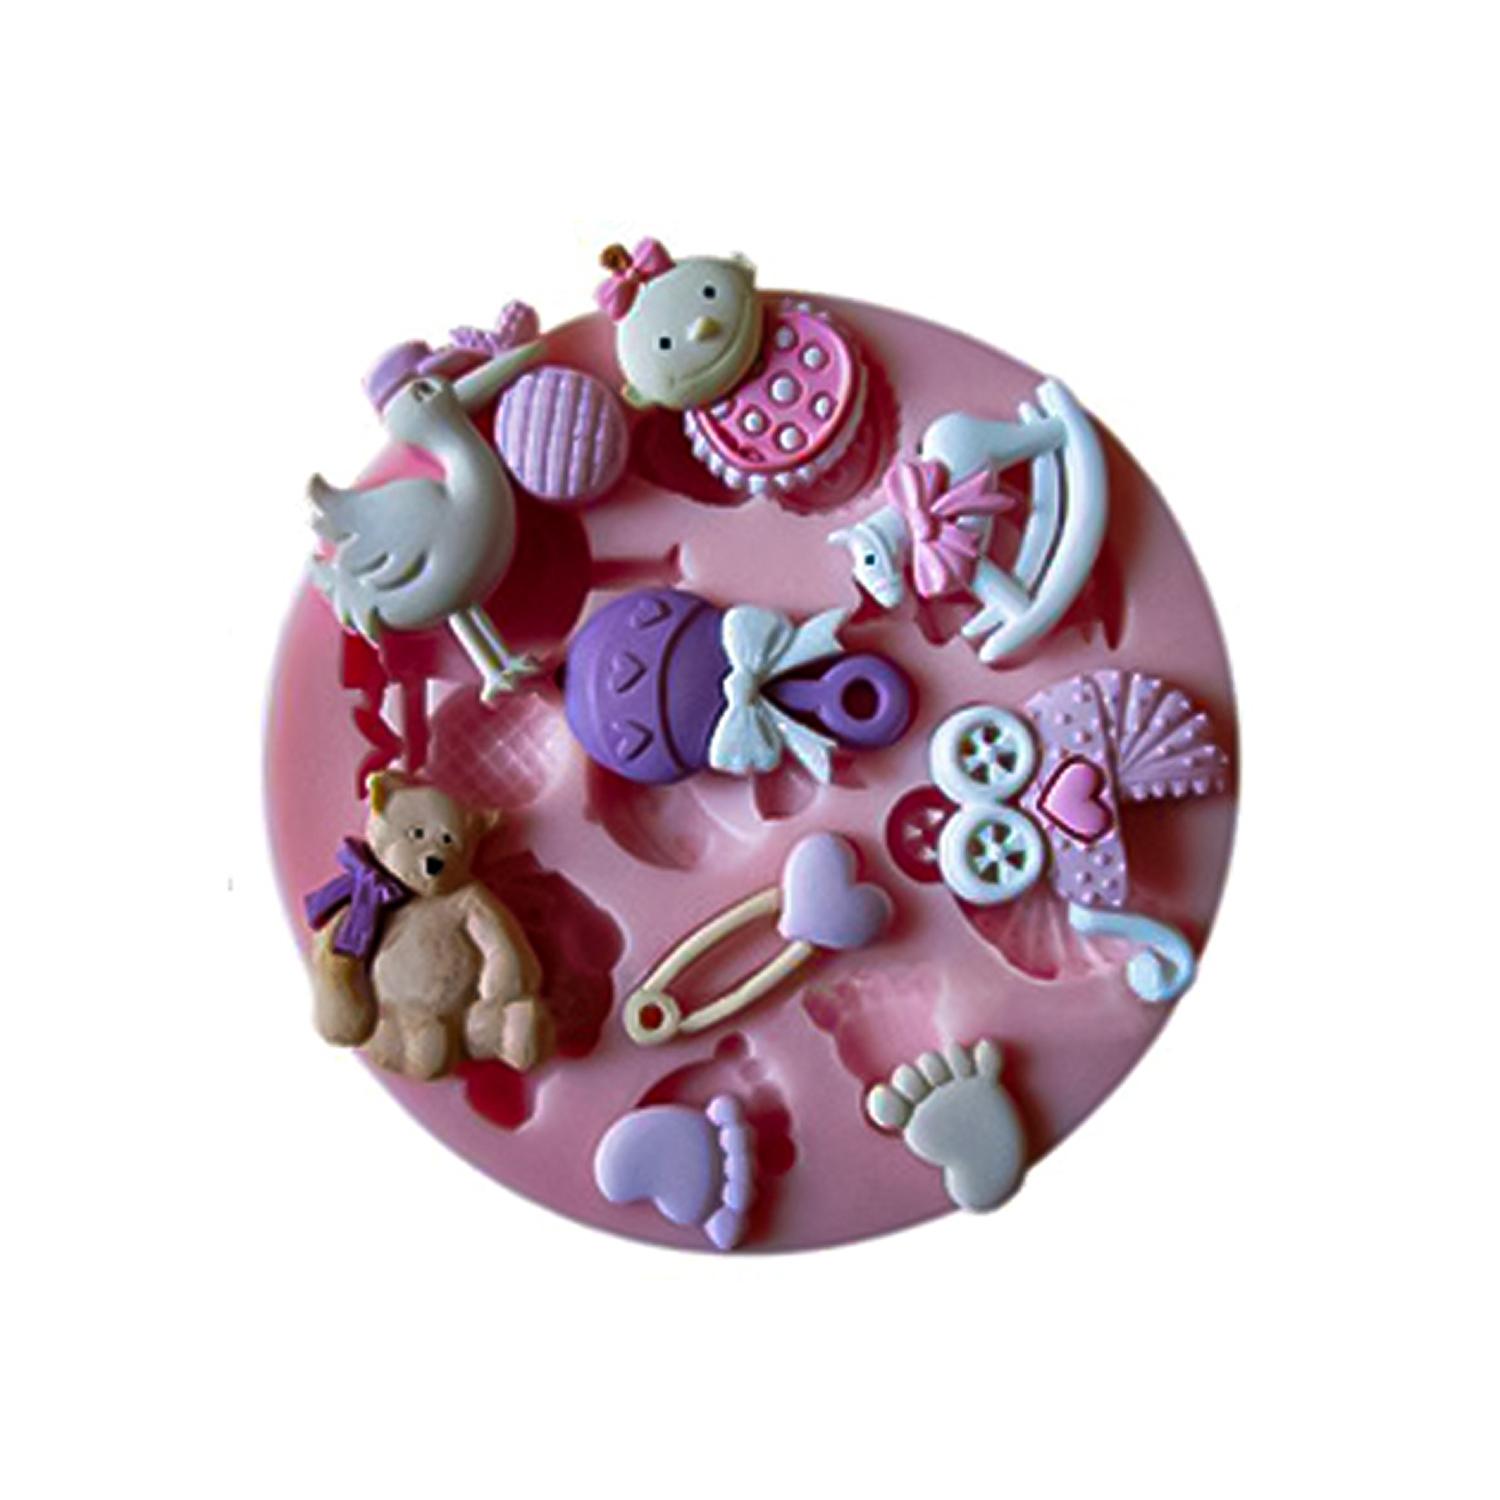 SFGM0120 BABY SHOWER ITEMS SILICONE MOULD